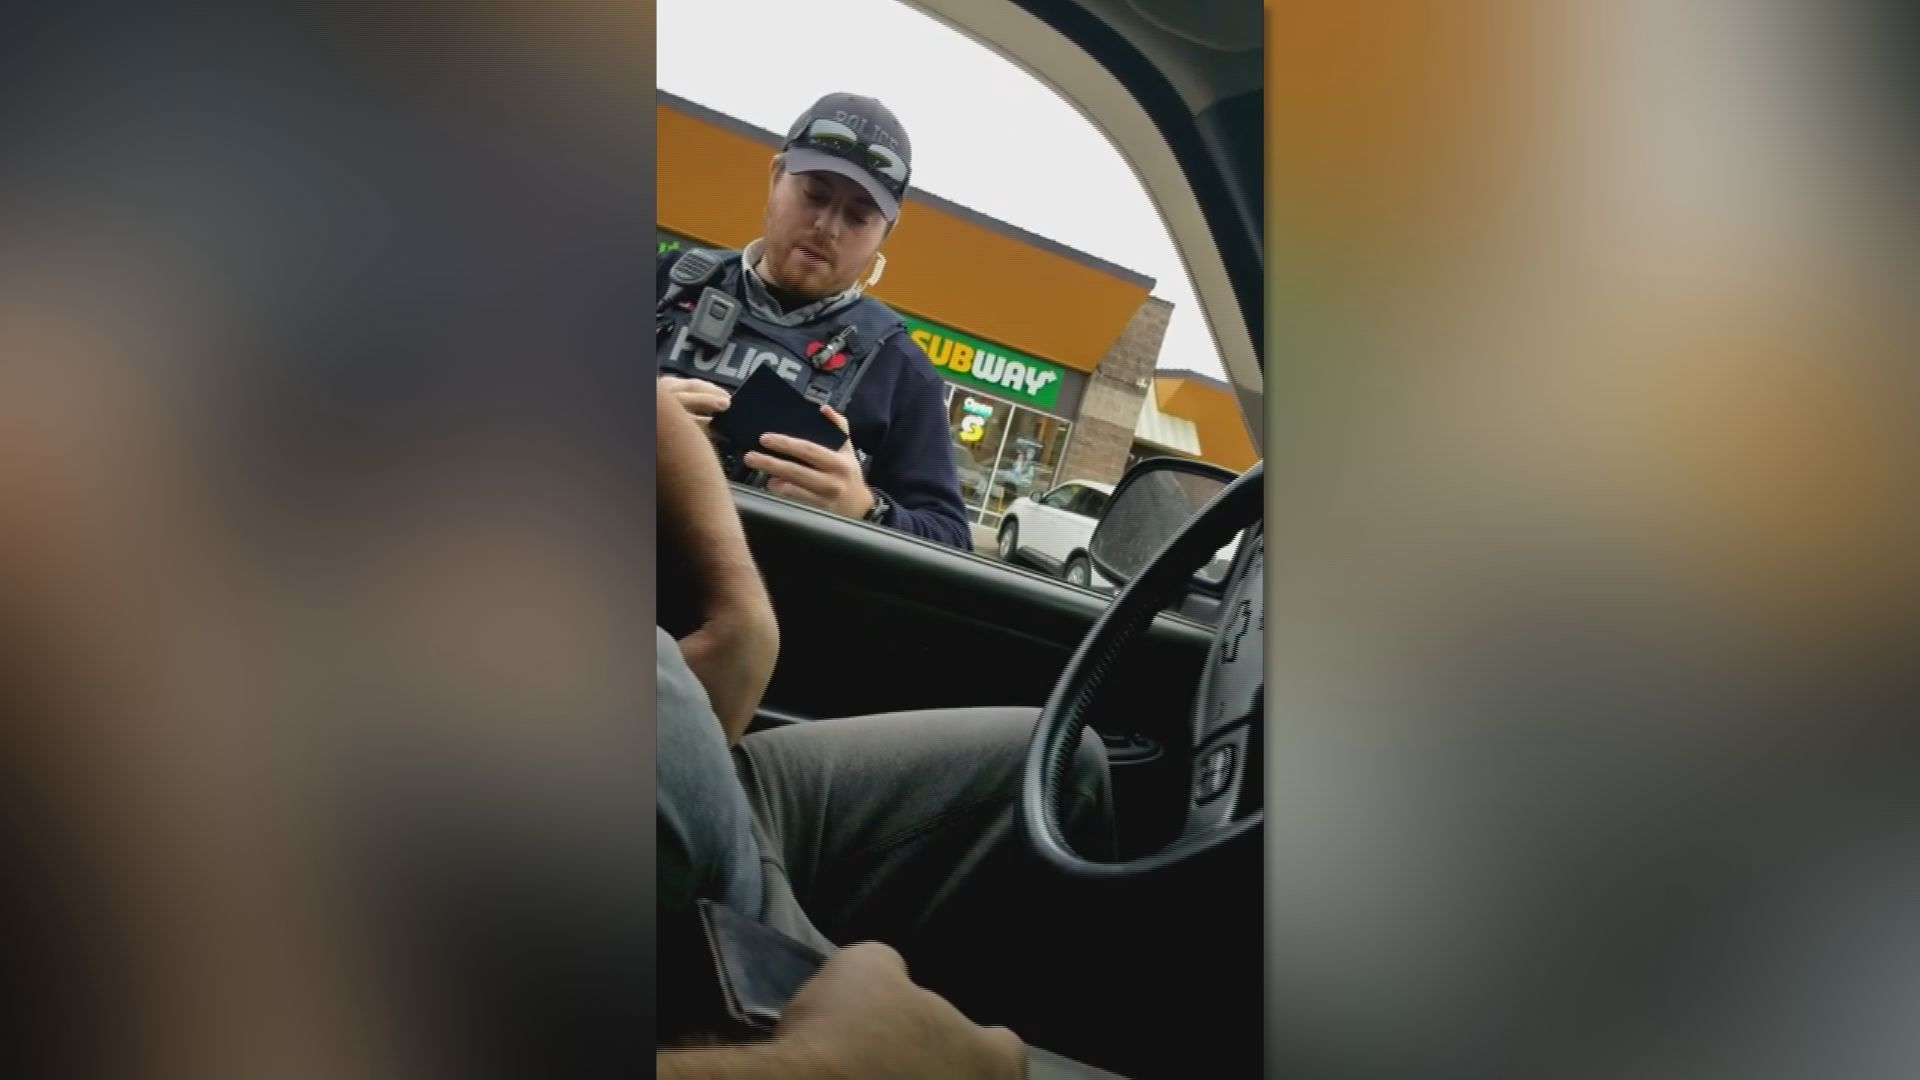 ‘No foundation in any law’: ‘Sovereign citizen’ questions B.C. traffic stop